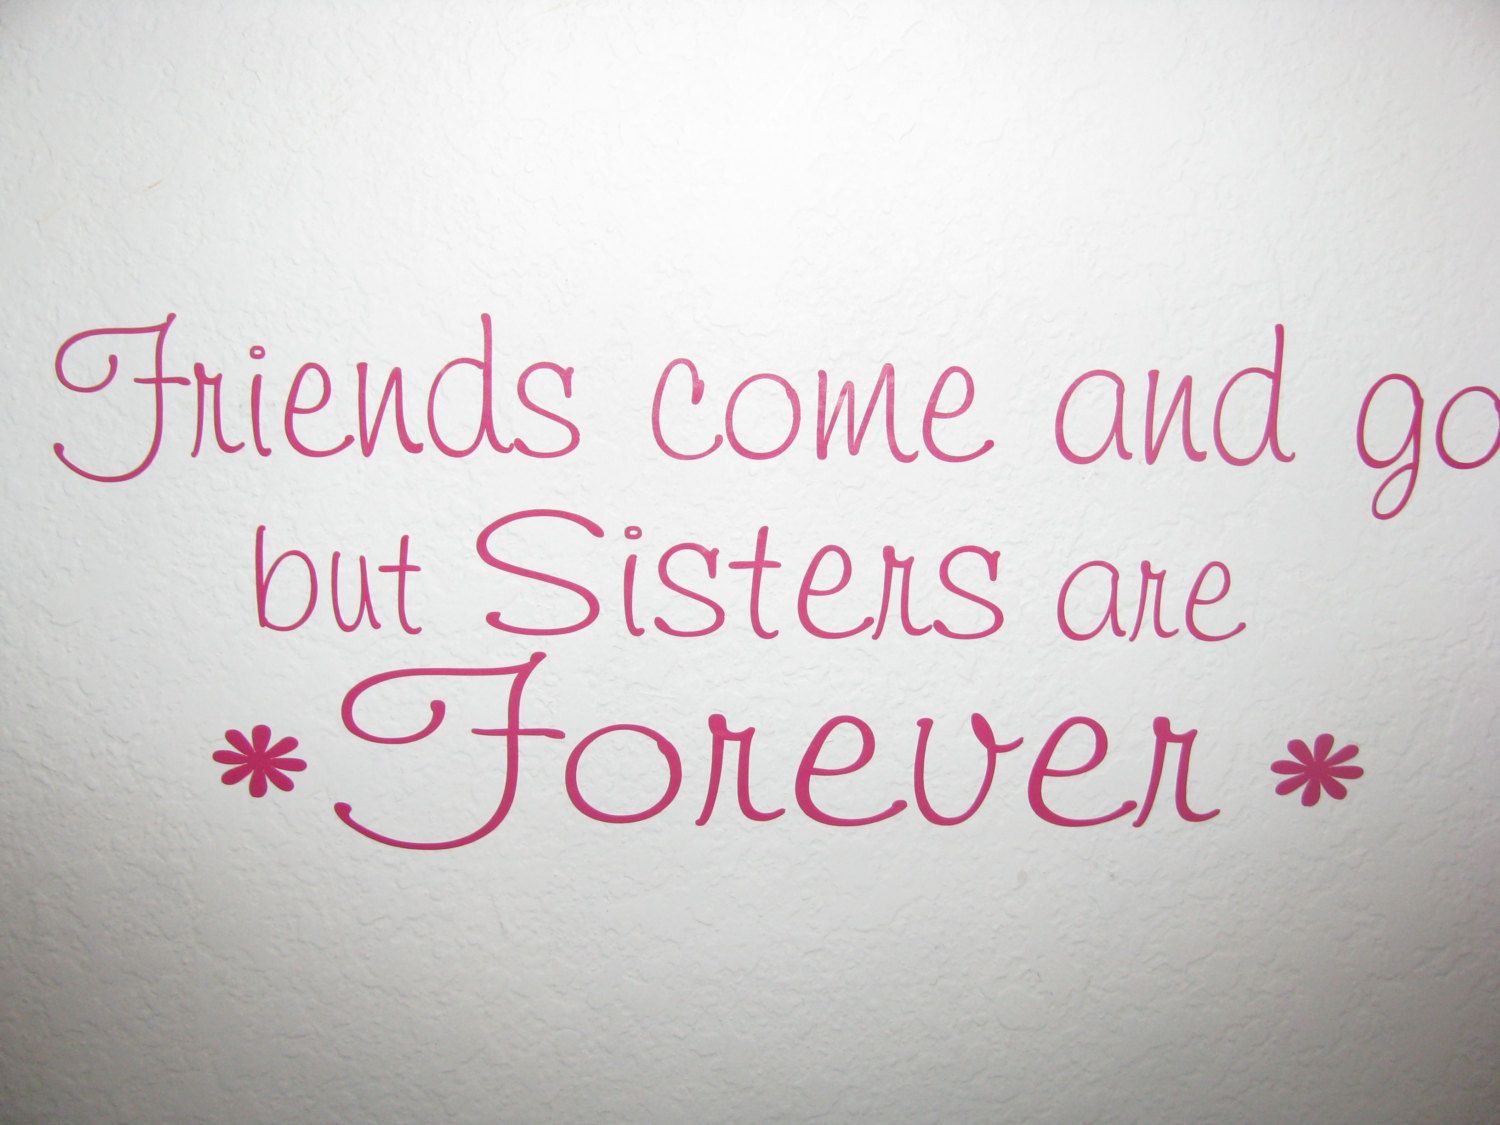 sister wallpapers quotes